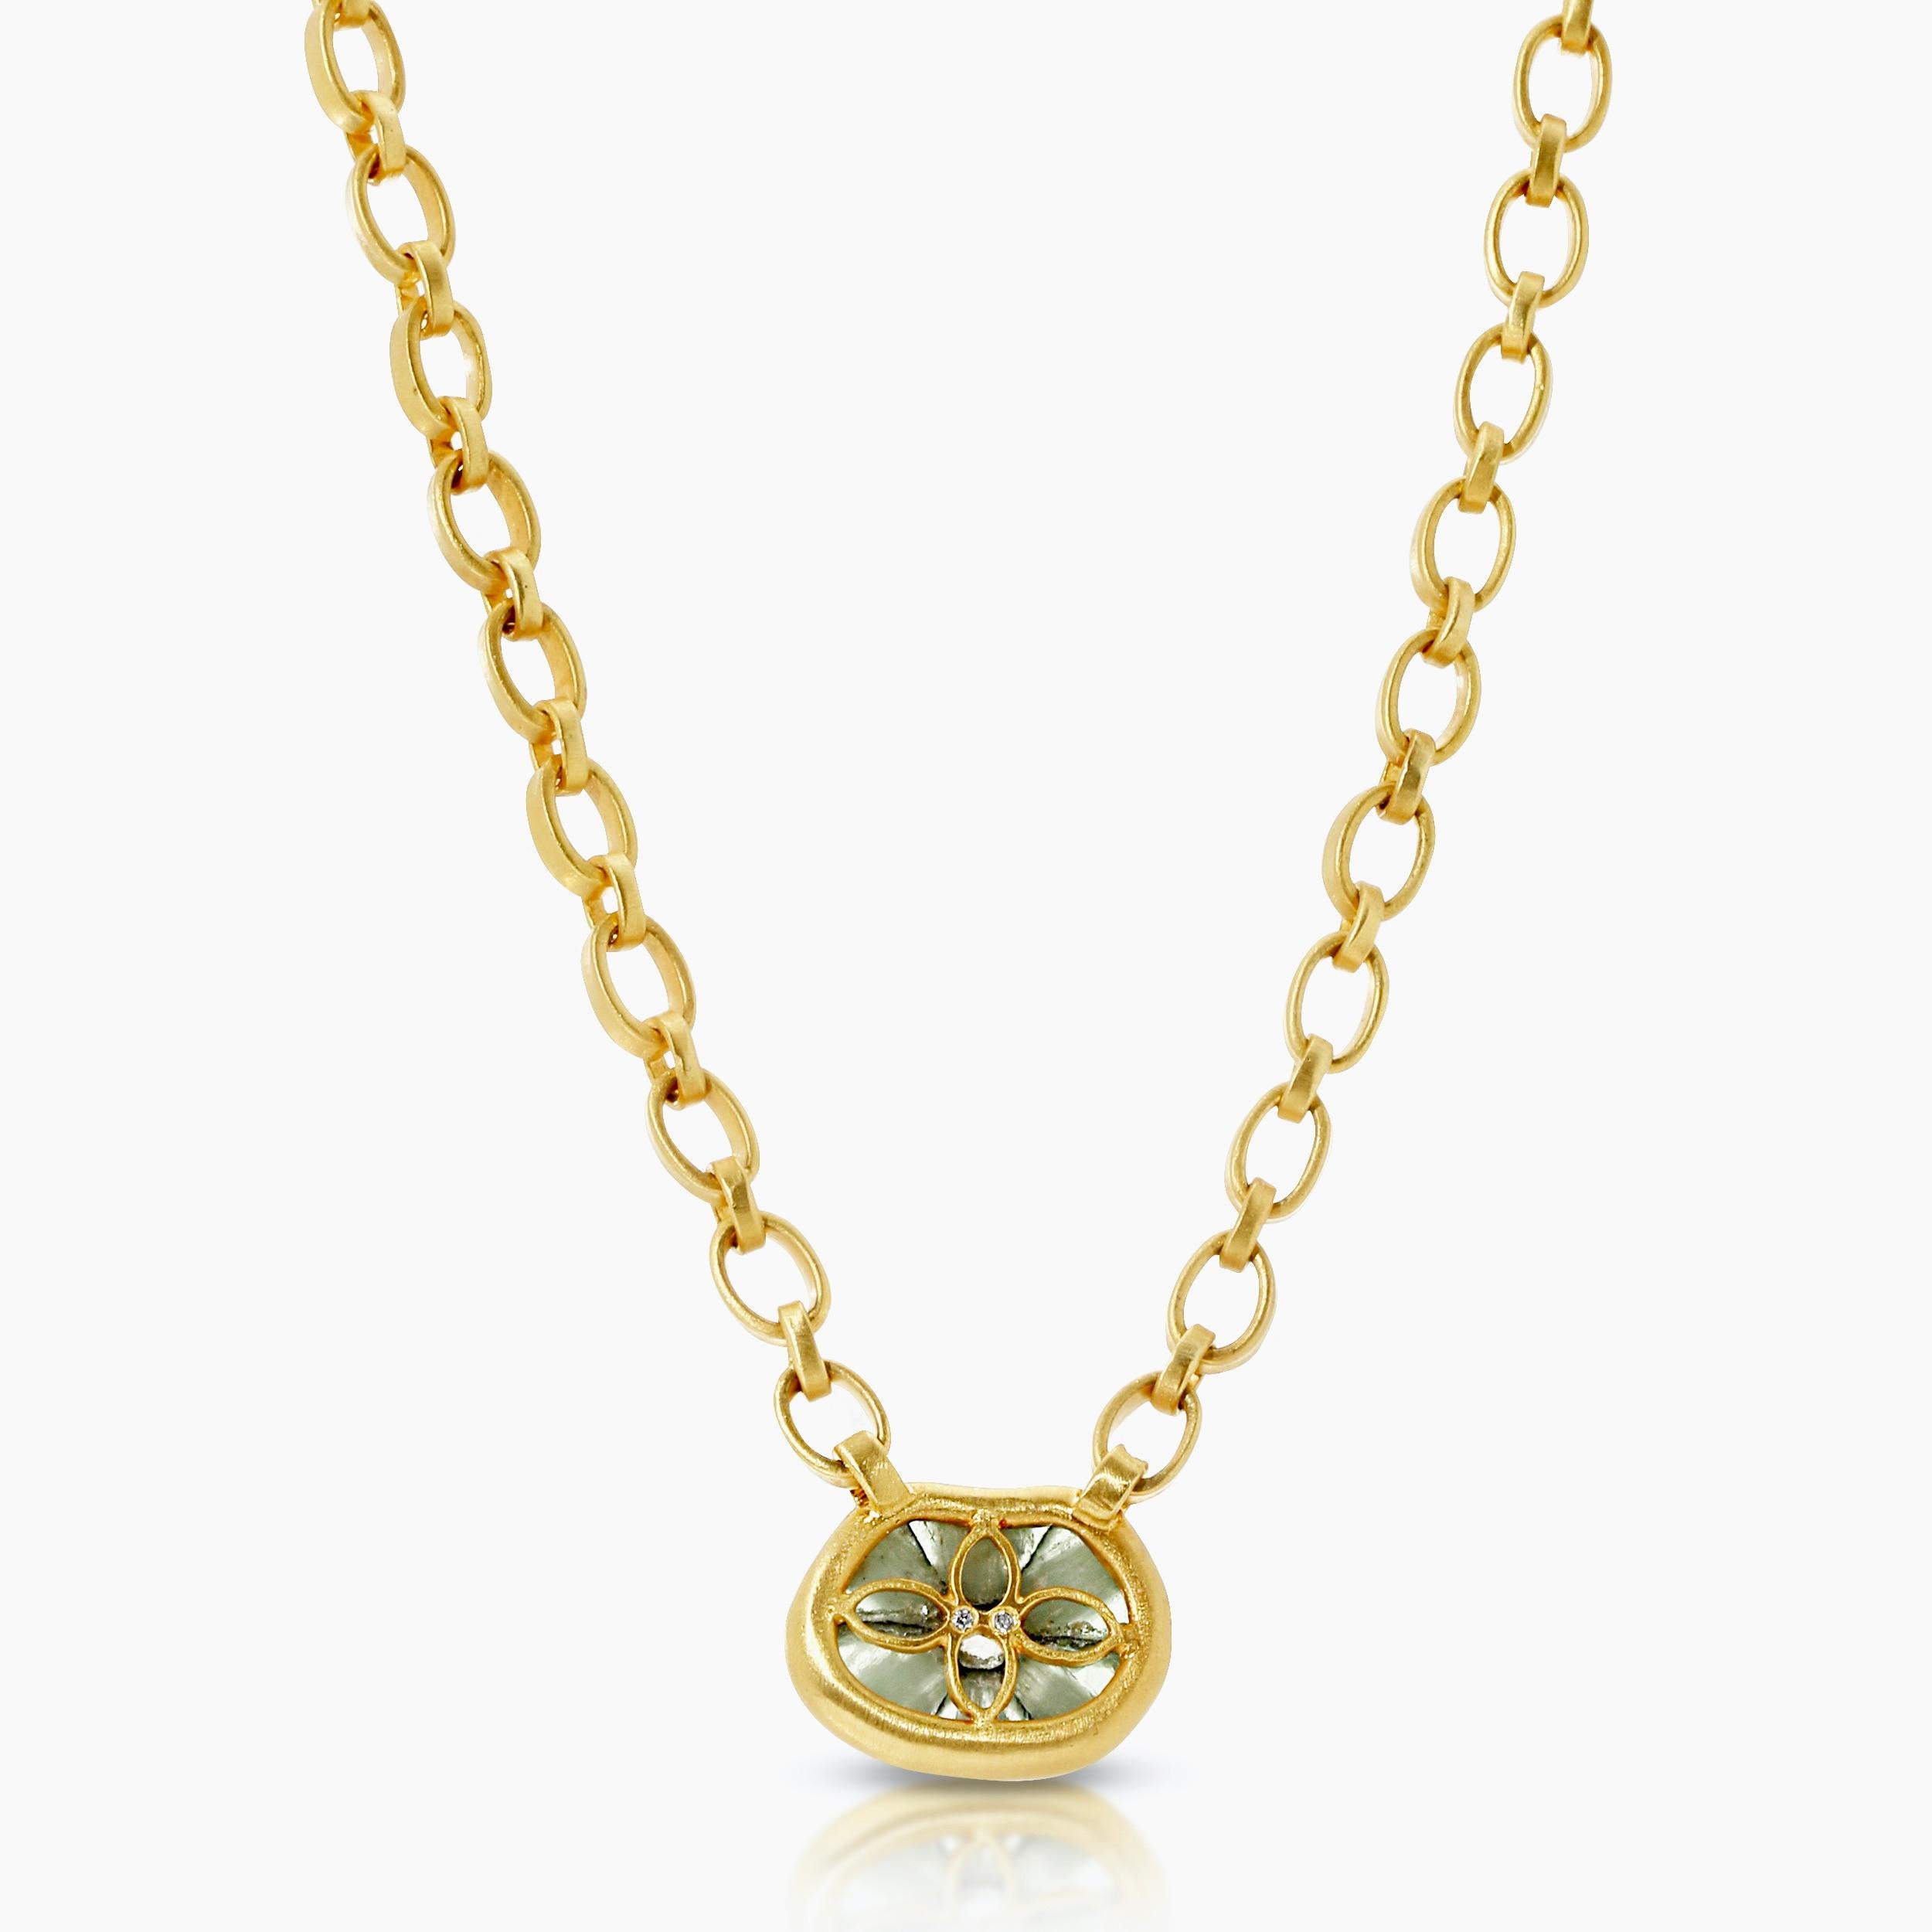 A 4.20ct Freeform Brazilian trapiche Emerald is Bezel Set in 18k Yellow Gold on a  17in. Handmade Chain and Toggle Closure. The Bezel is connected to the Handmade Chain with .08ct vs quality Diamond Pave set in the loops and the Toggle is accented